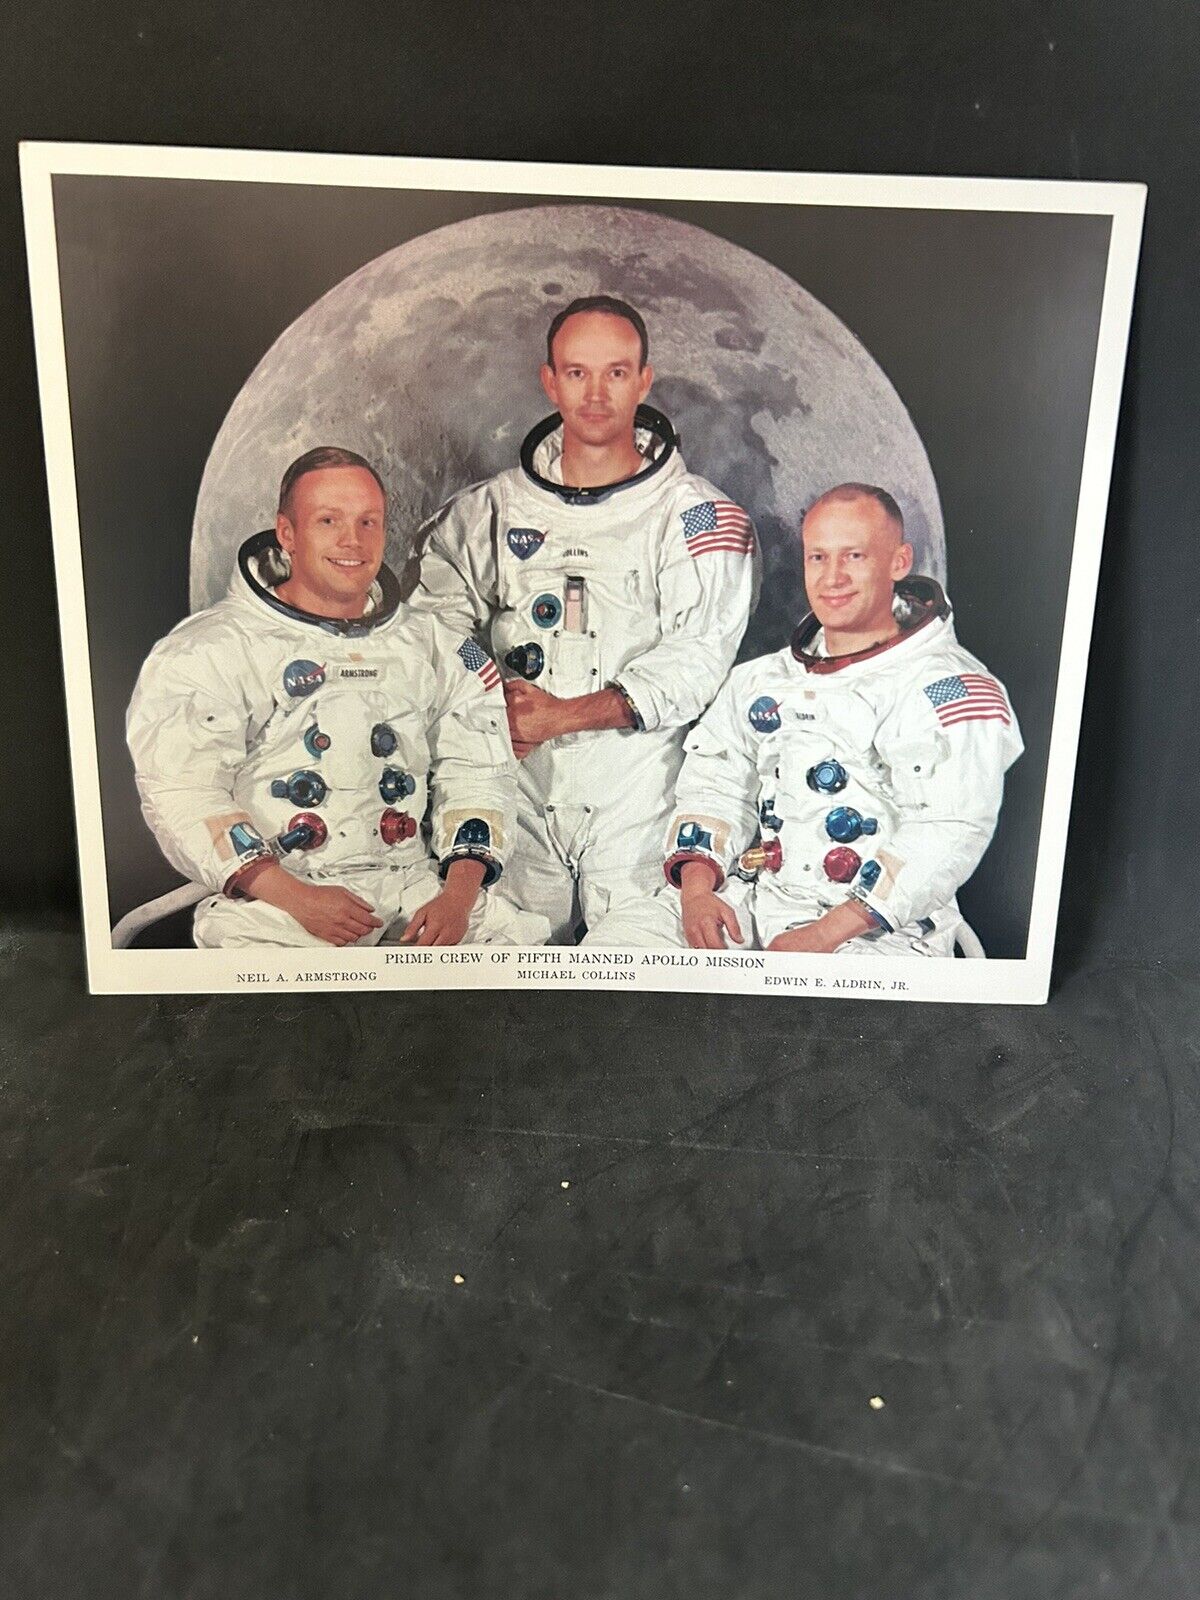 NASA Photo Crew Of Fifth Manned Apollo 11 Mission ARMSTRONG COLLINS ALDRIN 